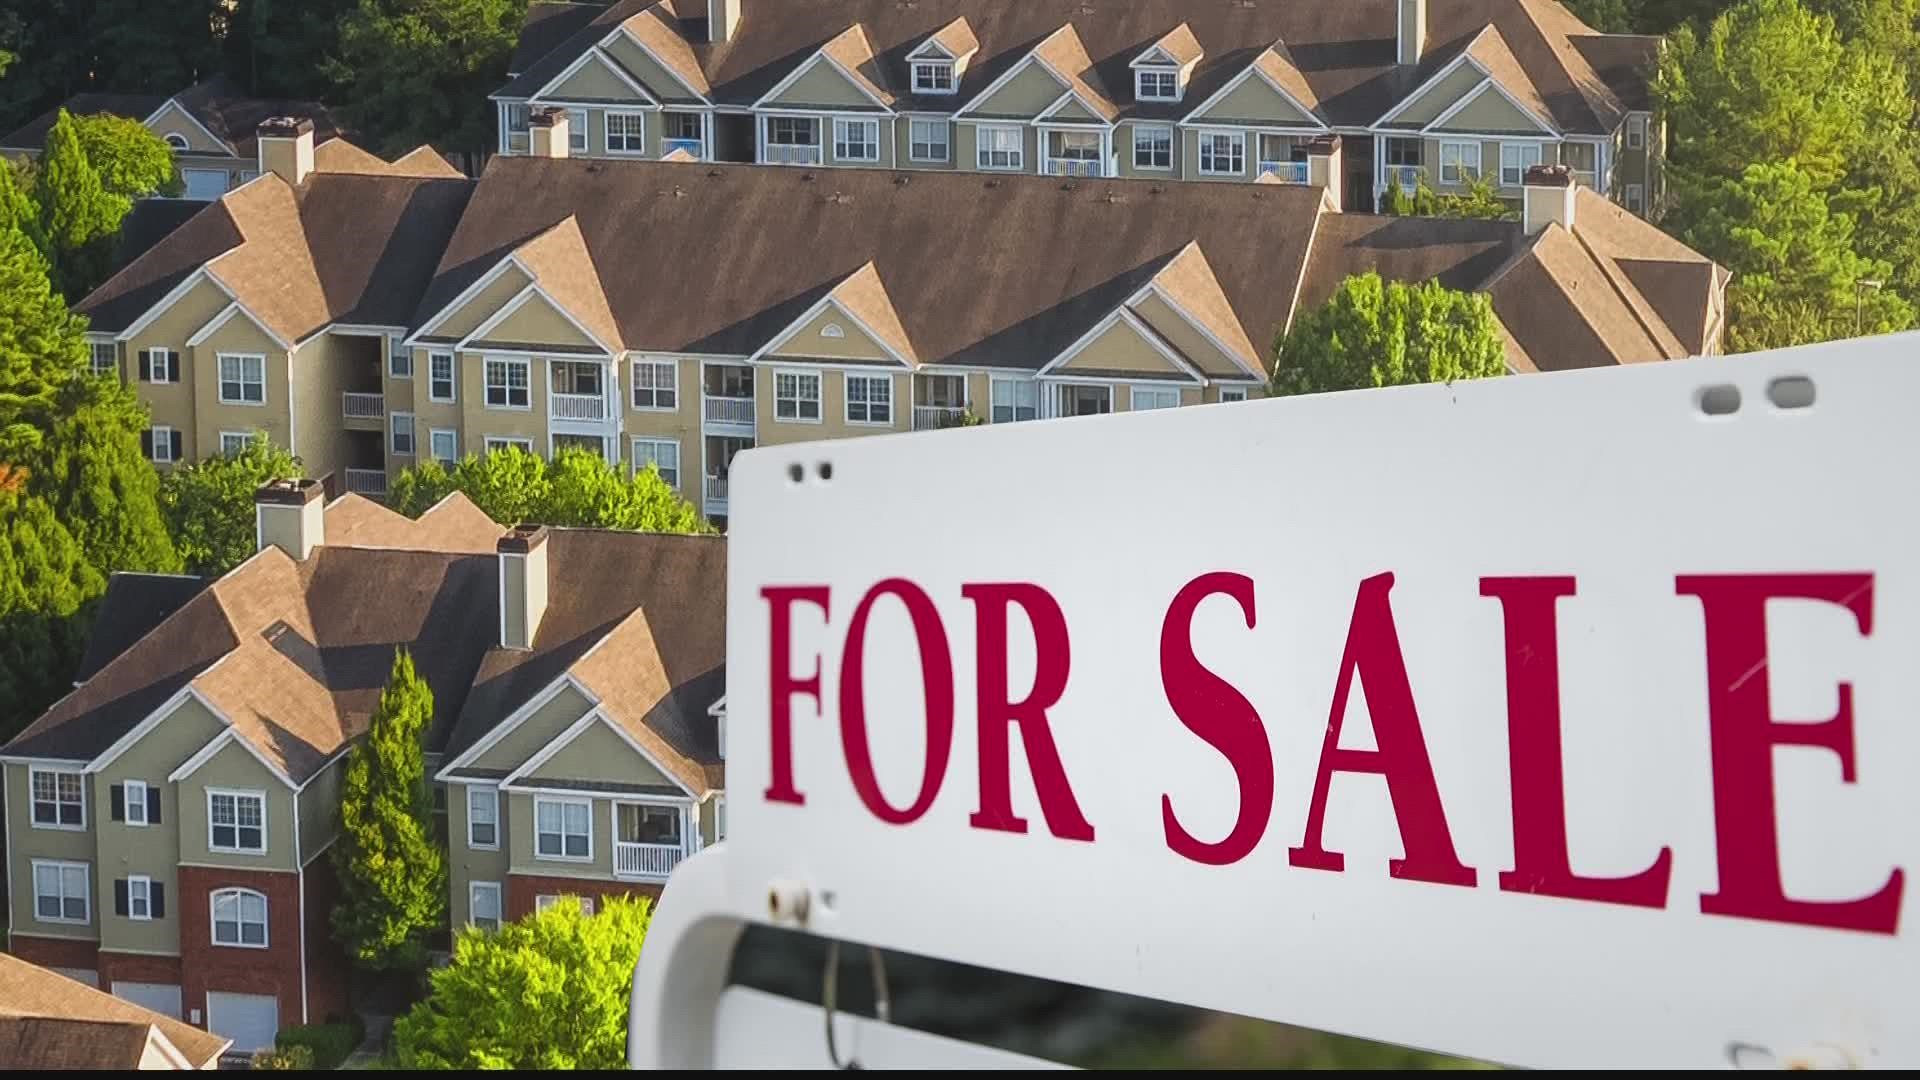 Researchers at Florida Atlantic University say Atlanta has one of the most “overpriced” housing markets in the United States.